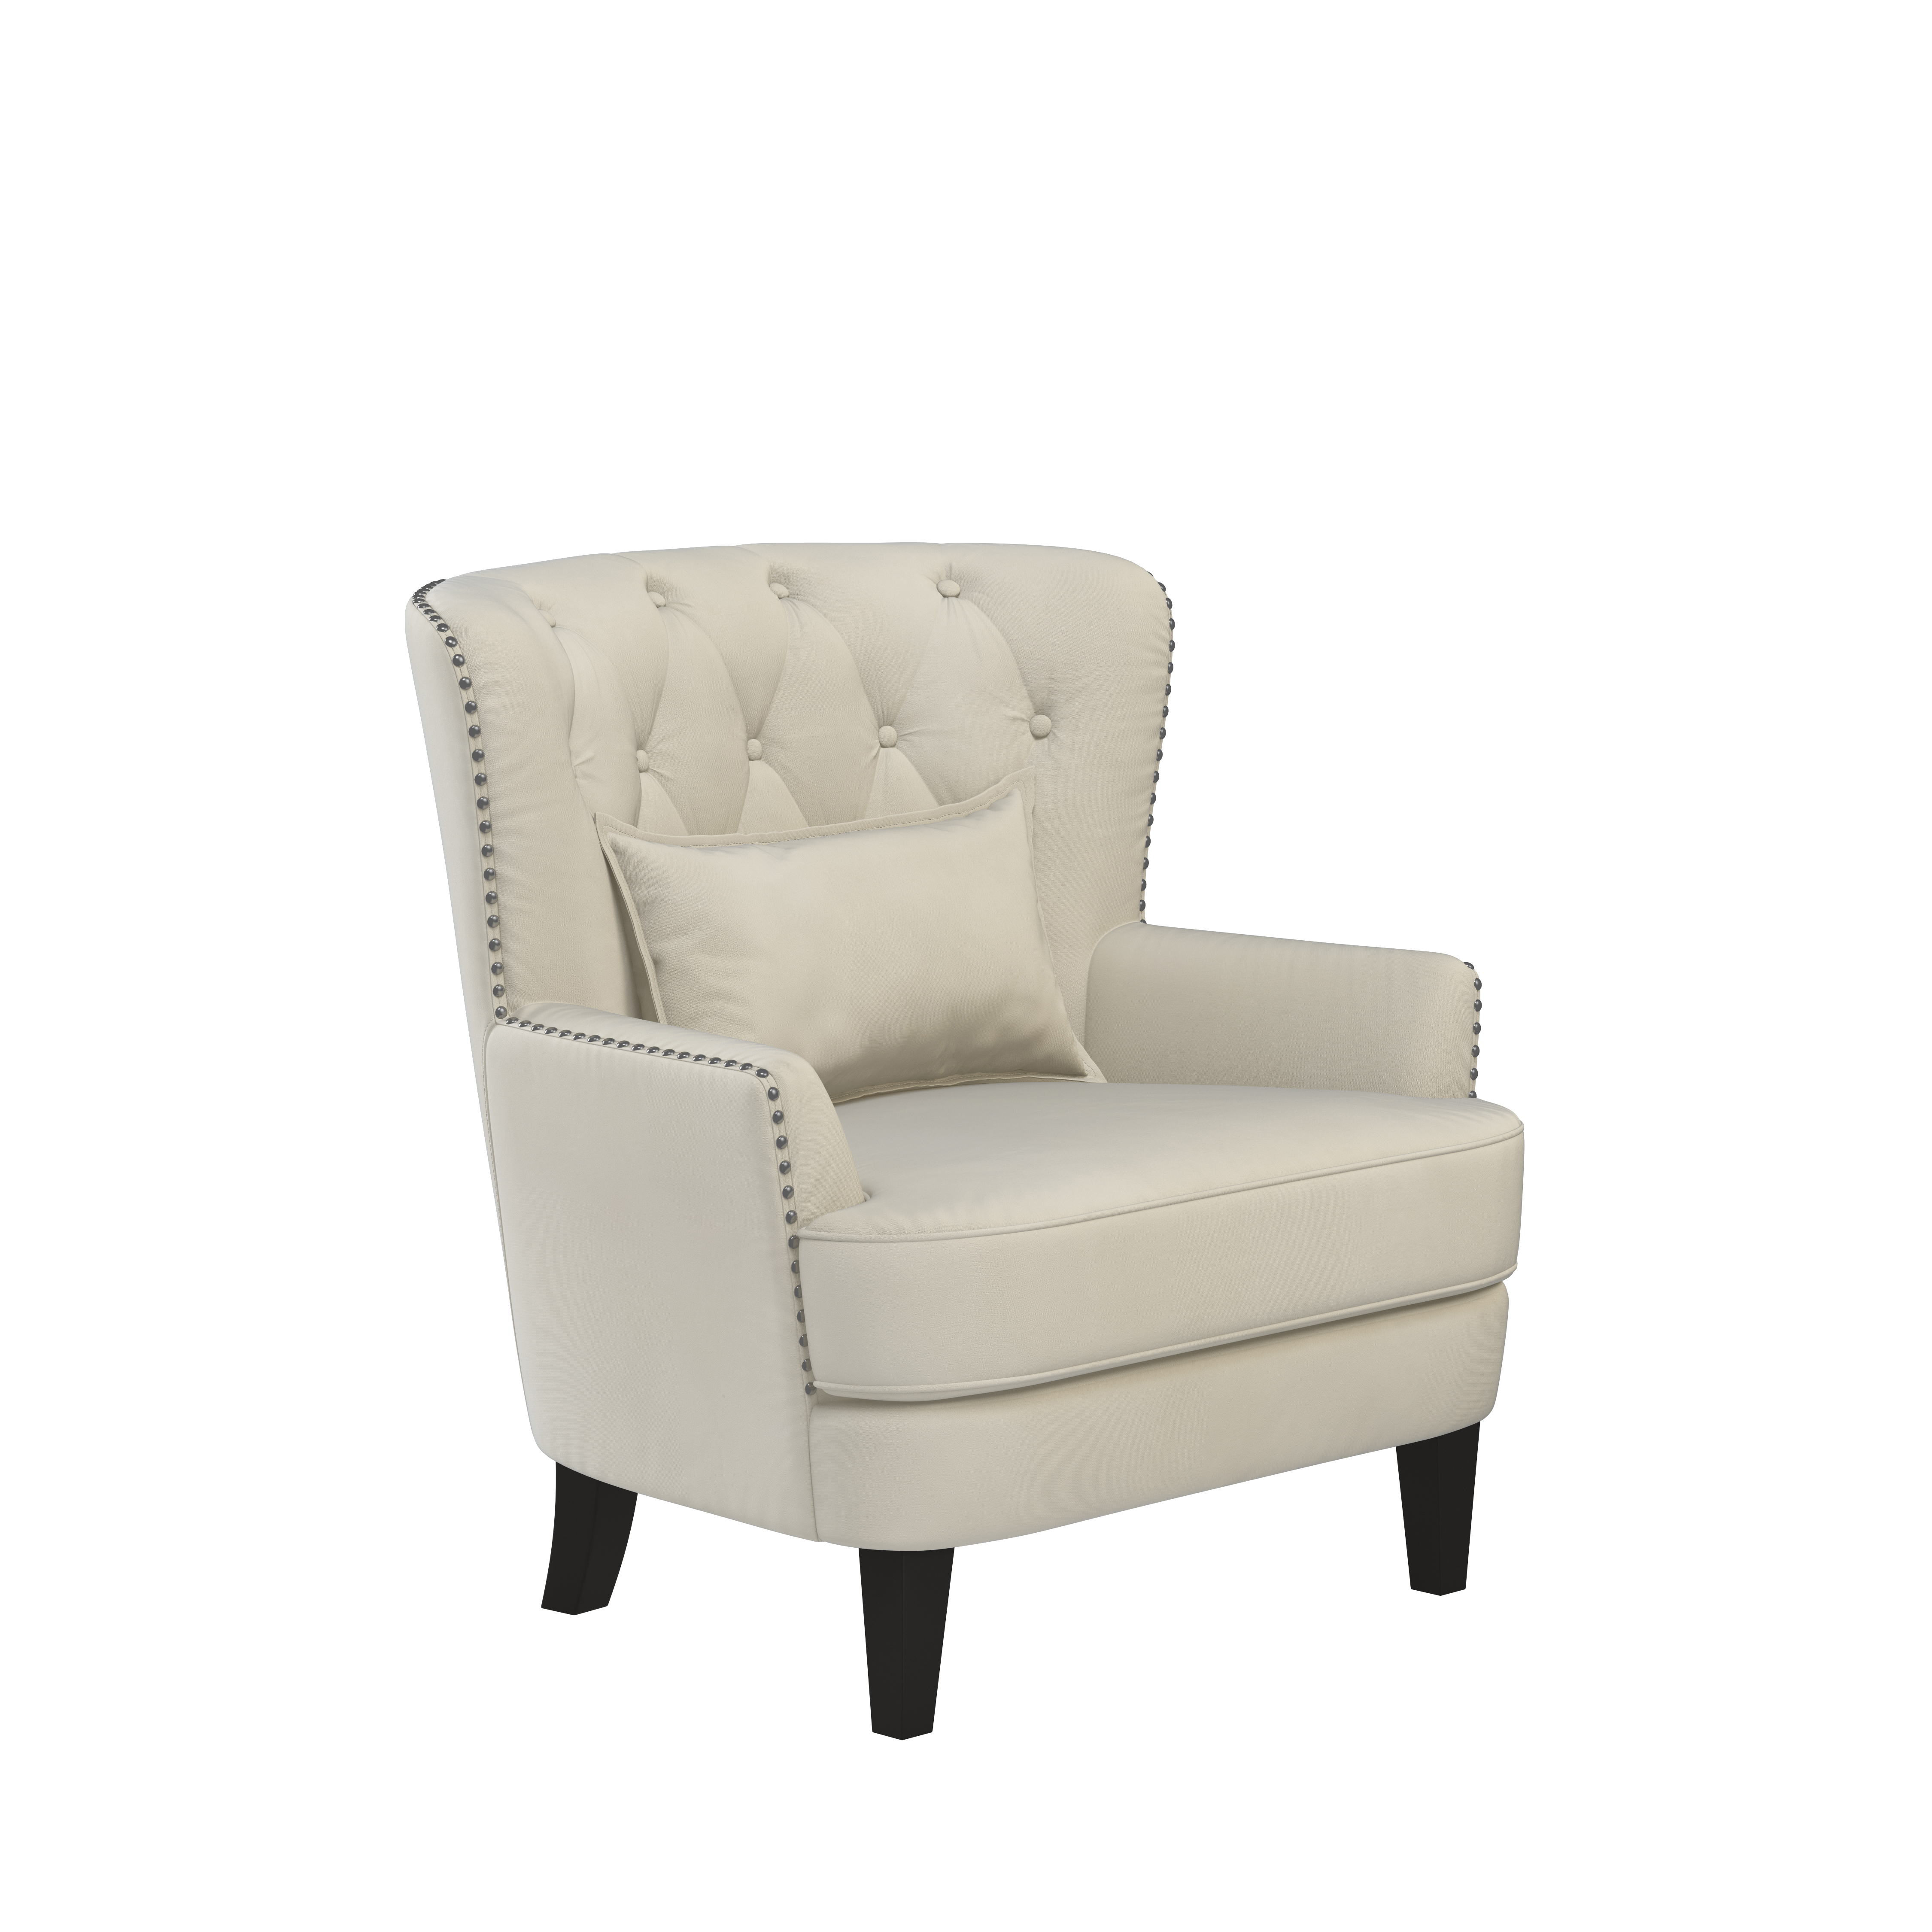 Lifestyle Solutions Lille Wingback Chair, Cream Fabric - image 5 of 9